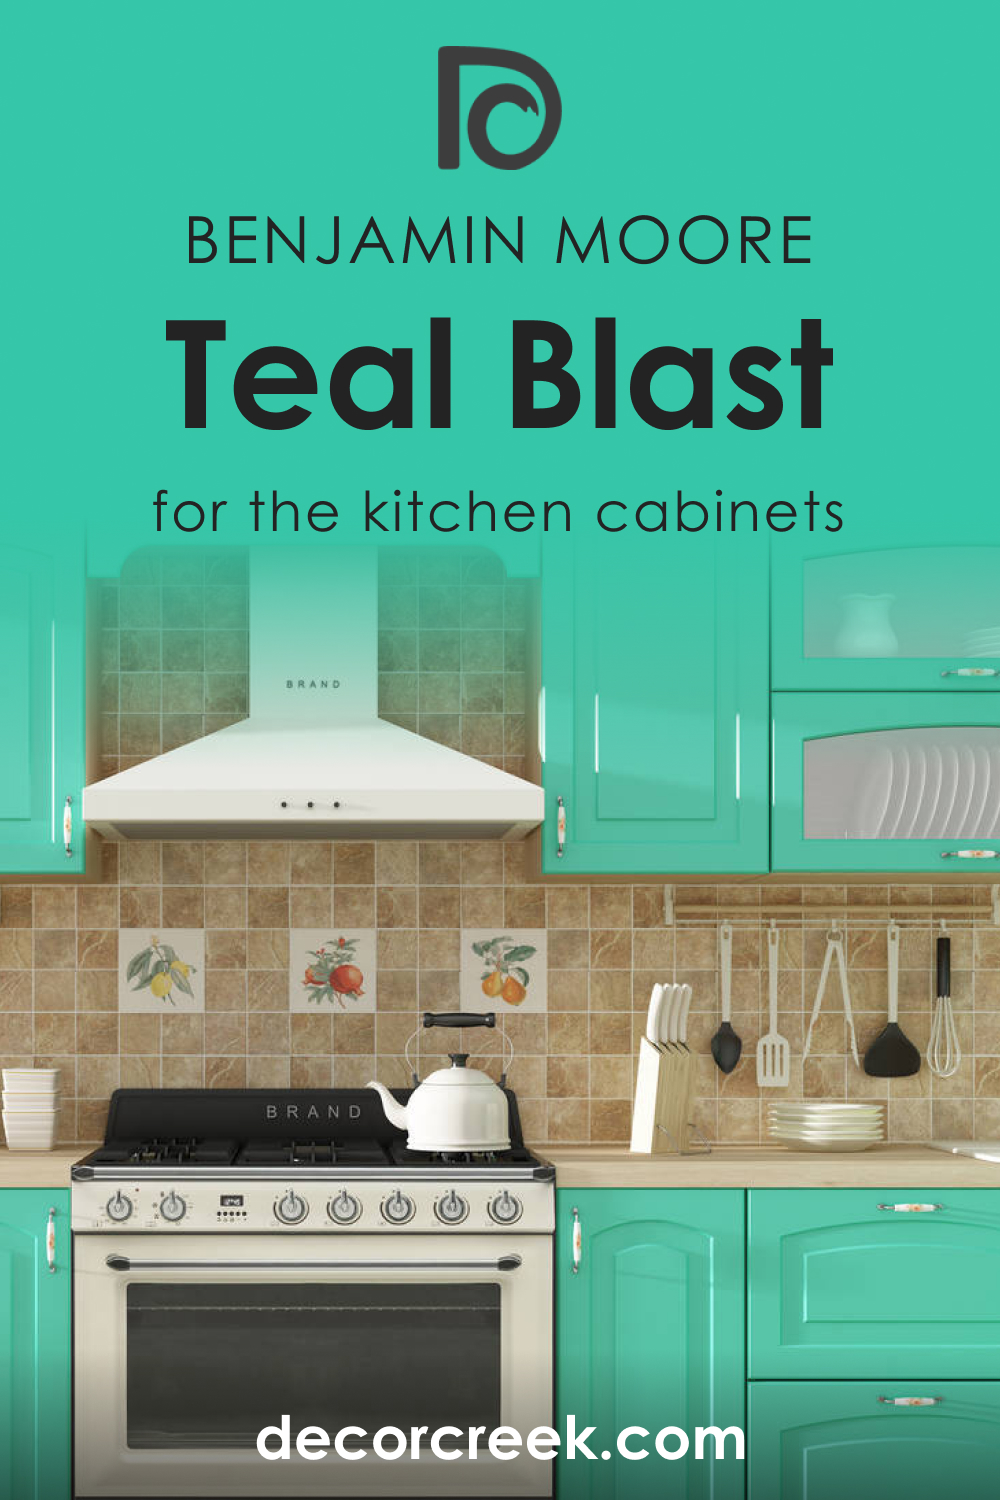 How to Use Teal Blast 2039-40 on the Kitchen Cabinets?